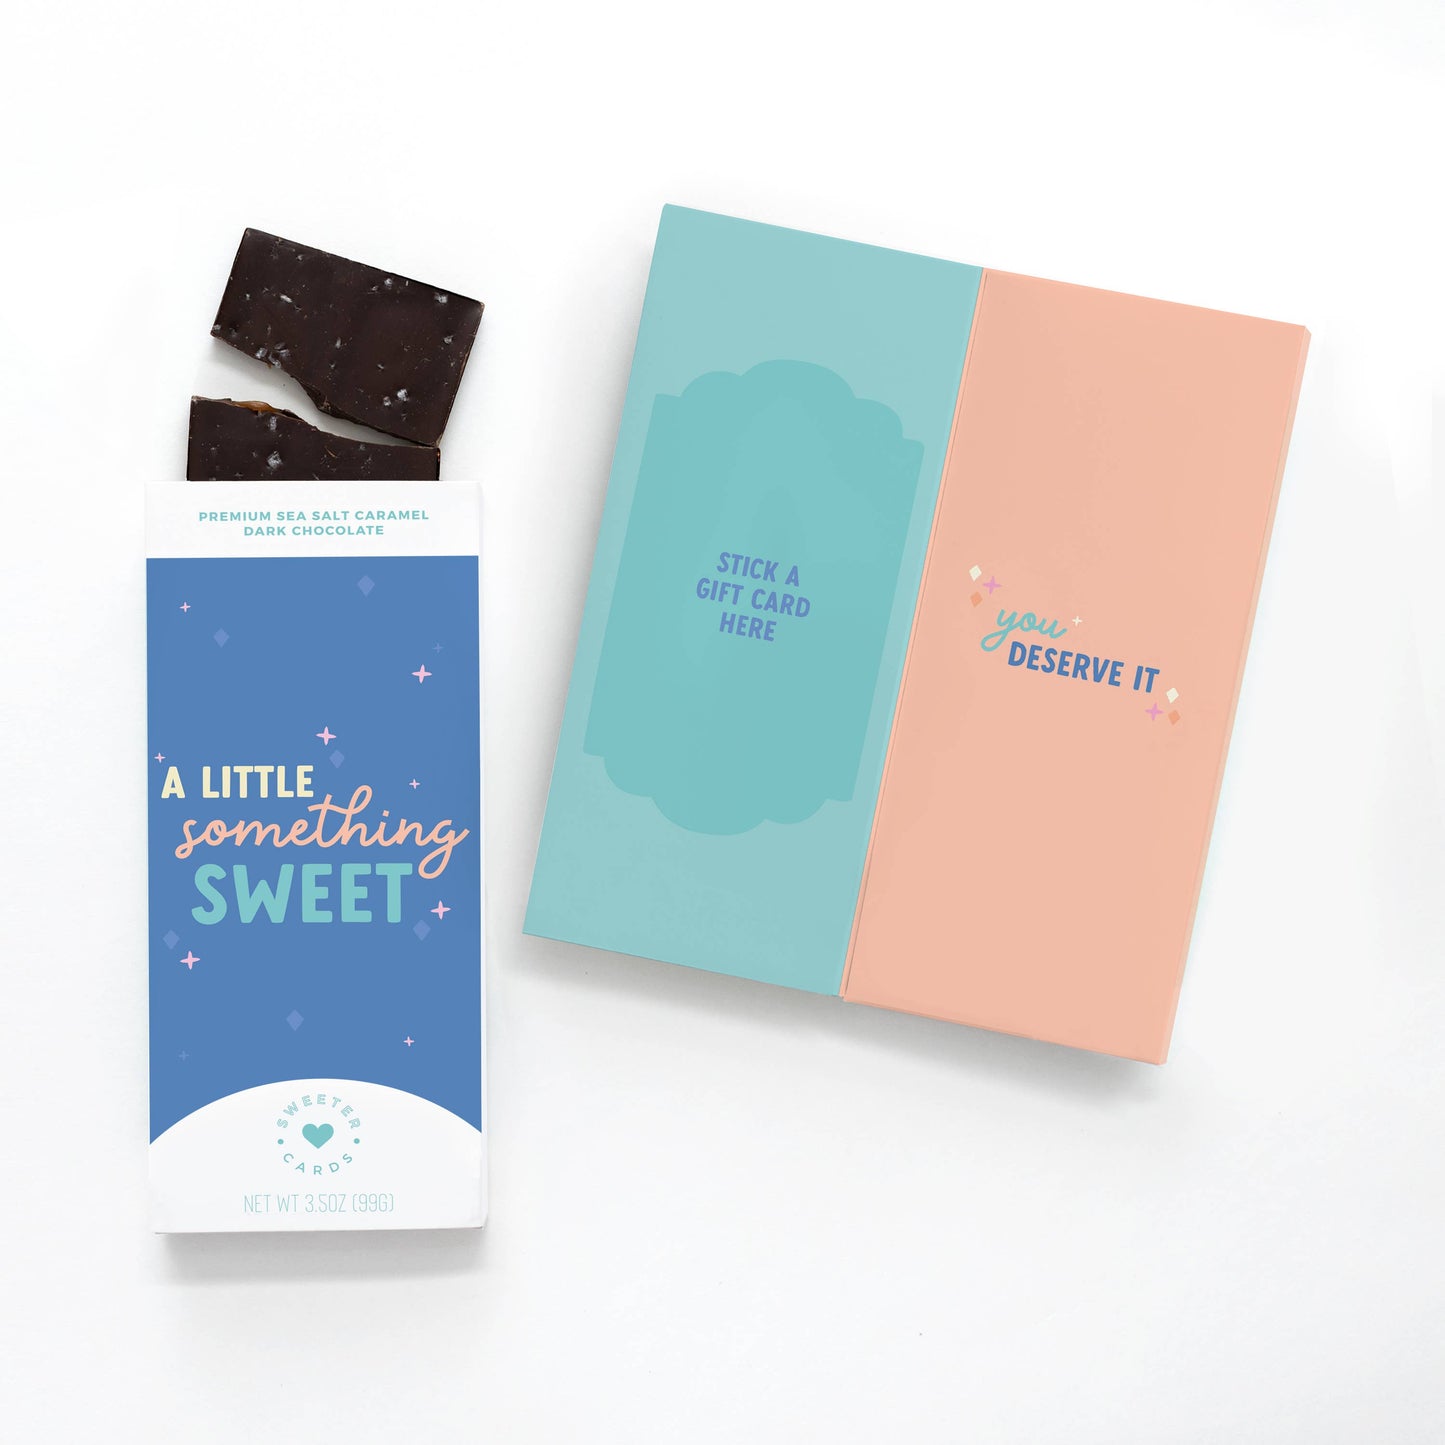 A Little Something – Gift Card Holder and Chocolate Bar